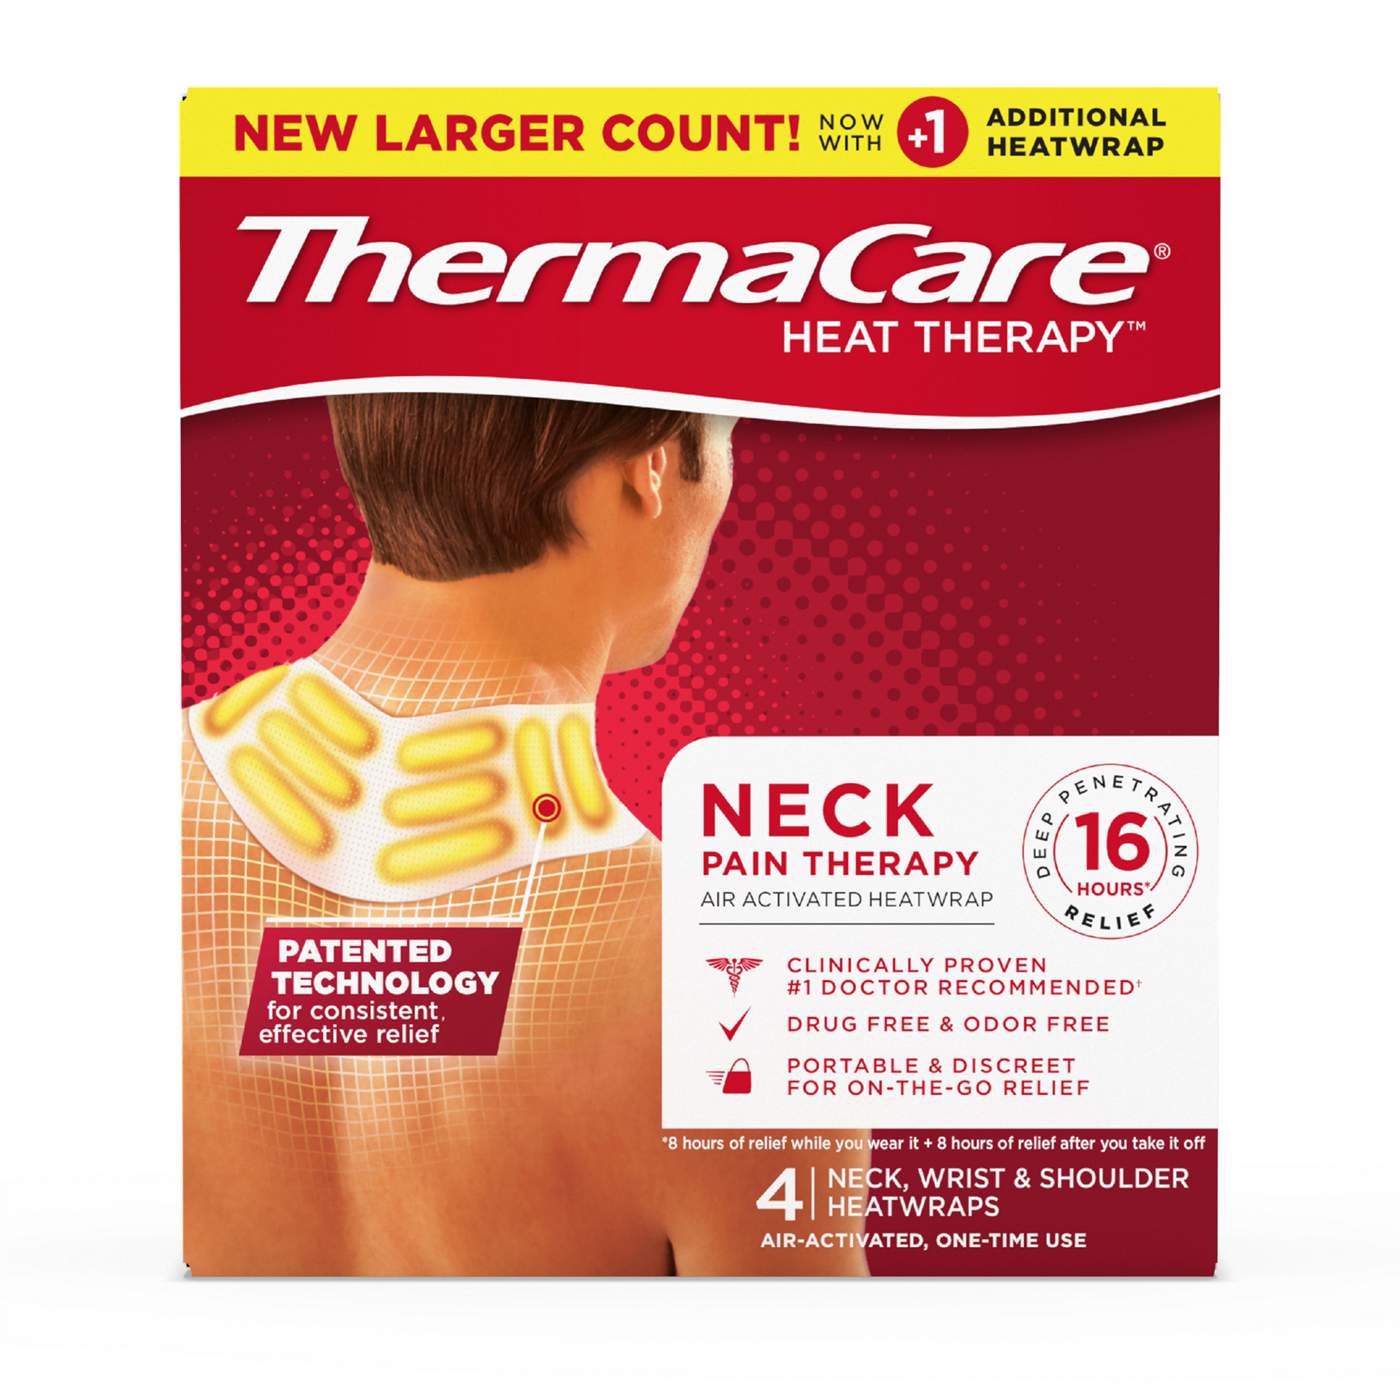 ThermaCare Neck Pain Therapy Heatwraps; image 1 of 3